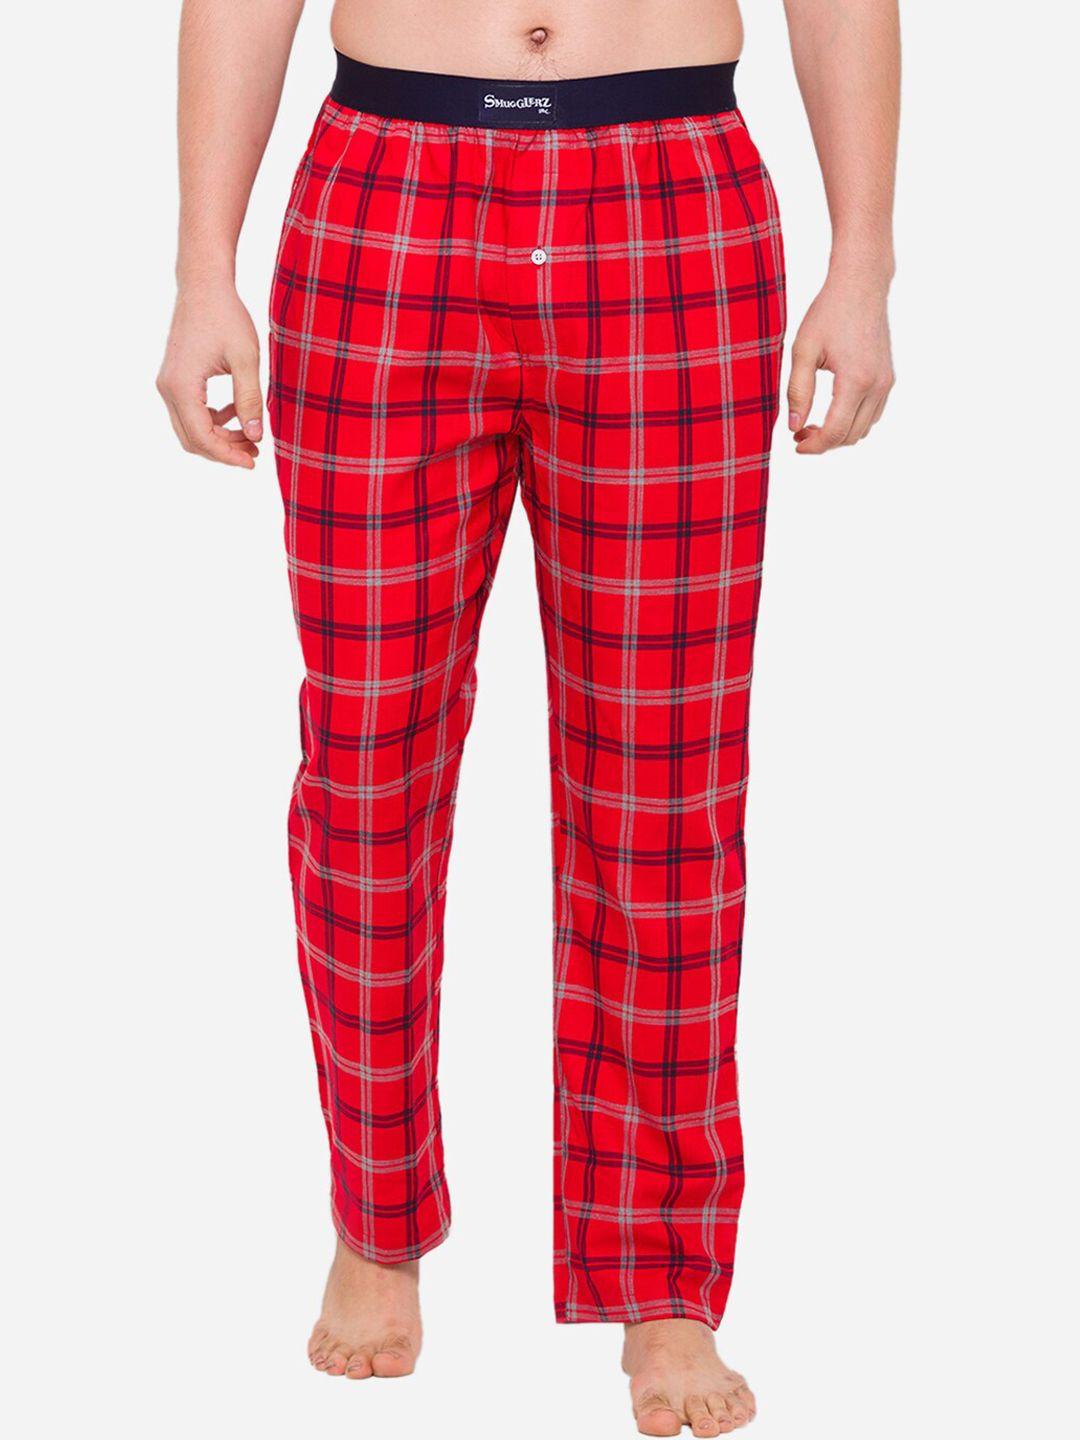 smugglerz inc. men red checked cotton lounge pants